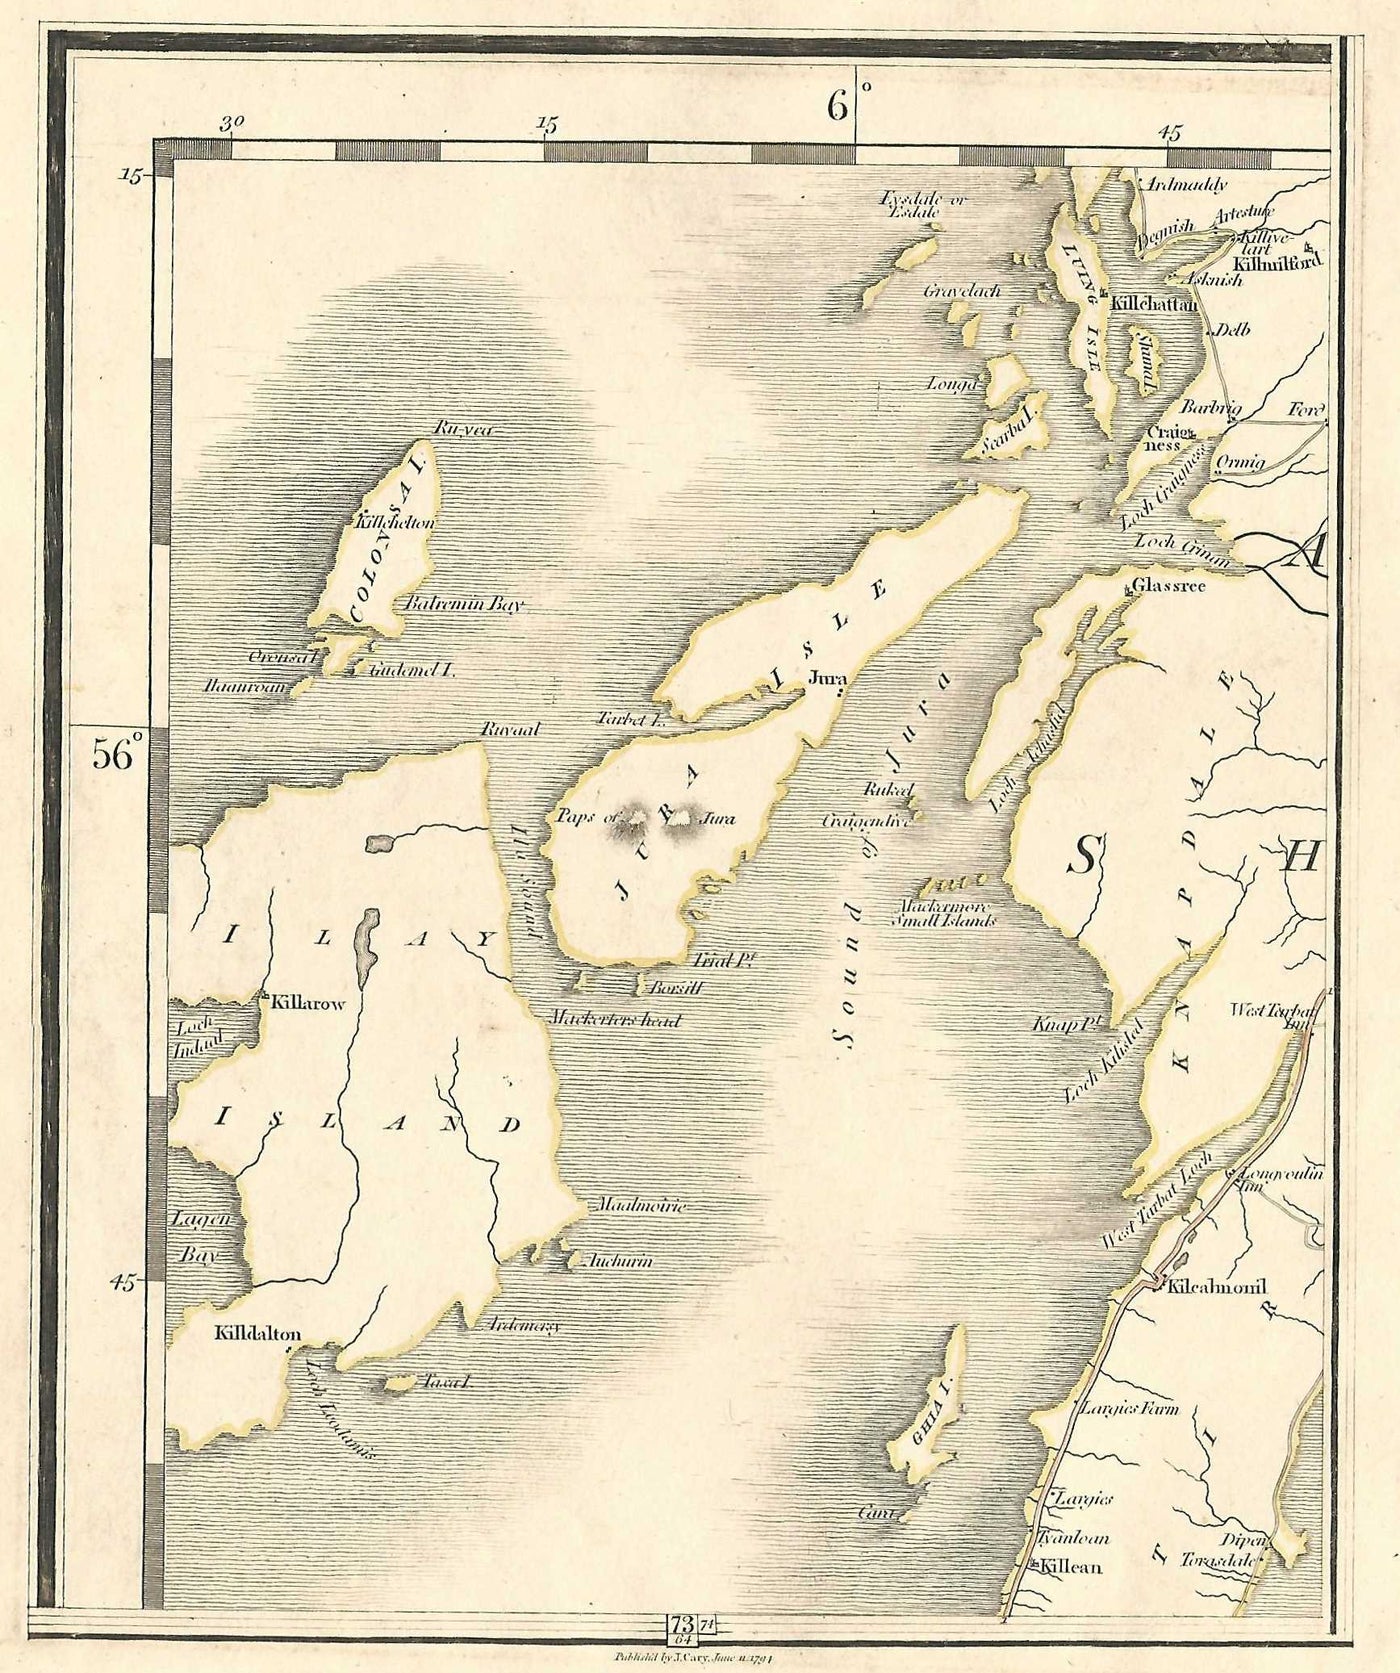 Jura Islay Colonsay Inner Hebrides Scotland antique map published by John Cary 1794